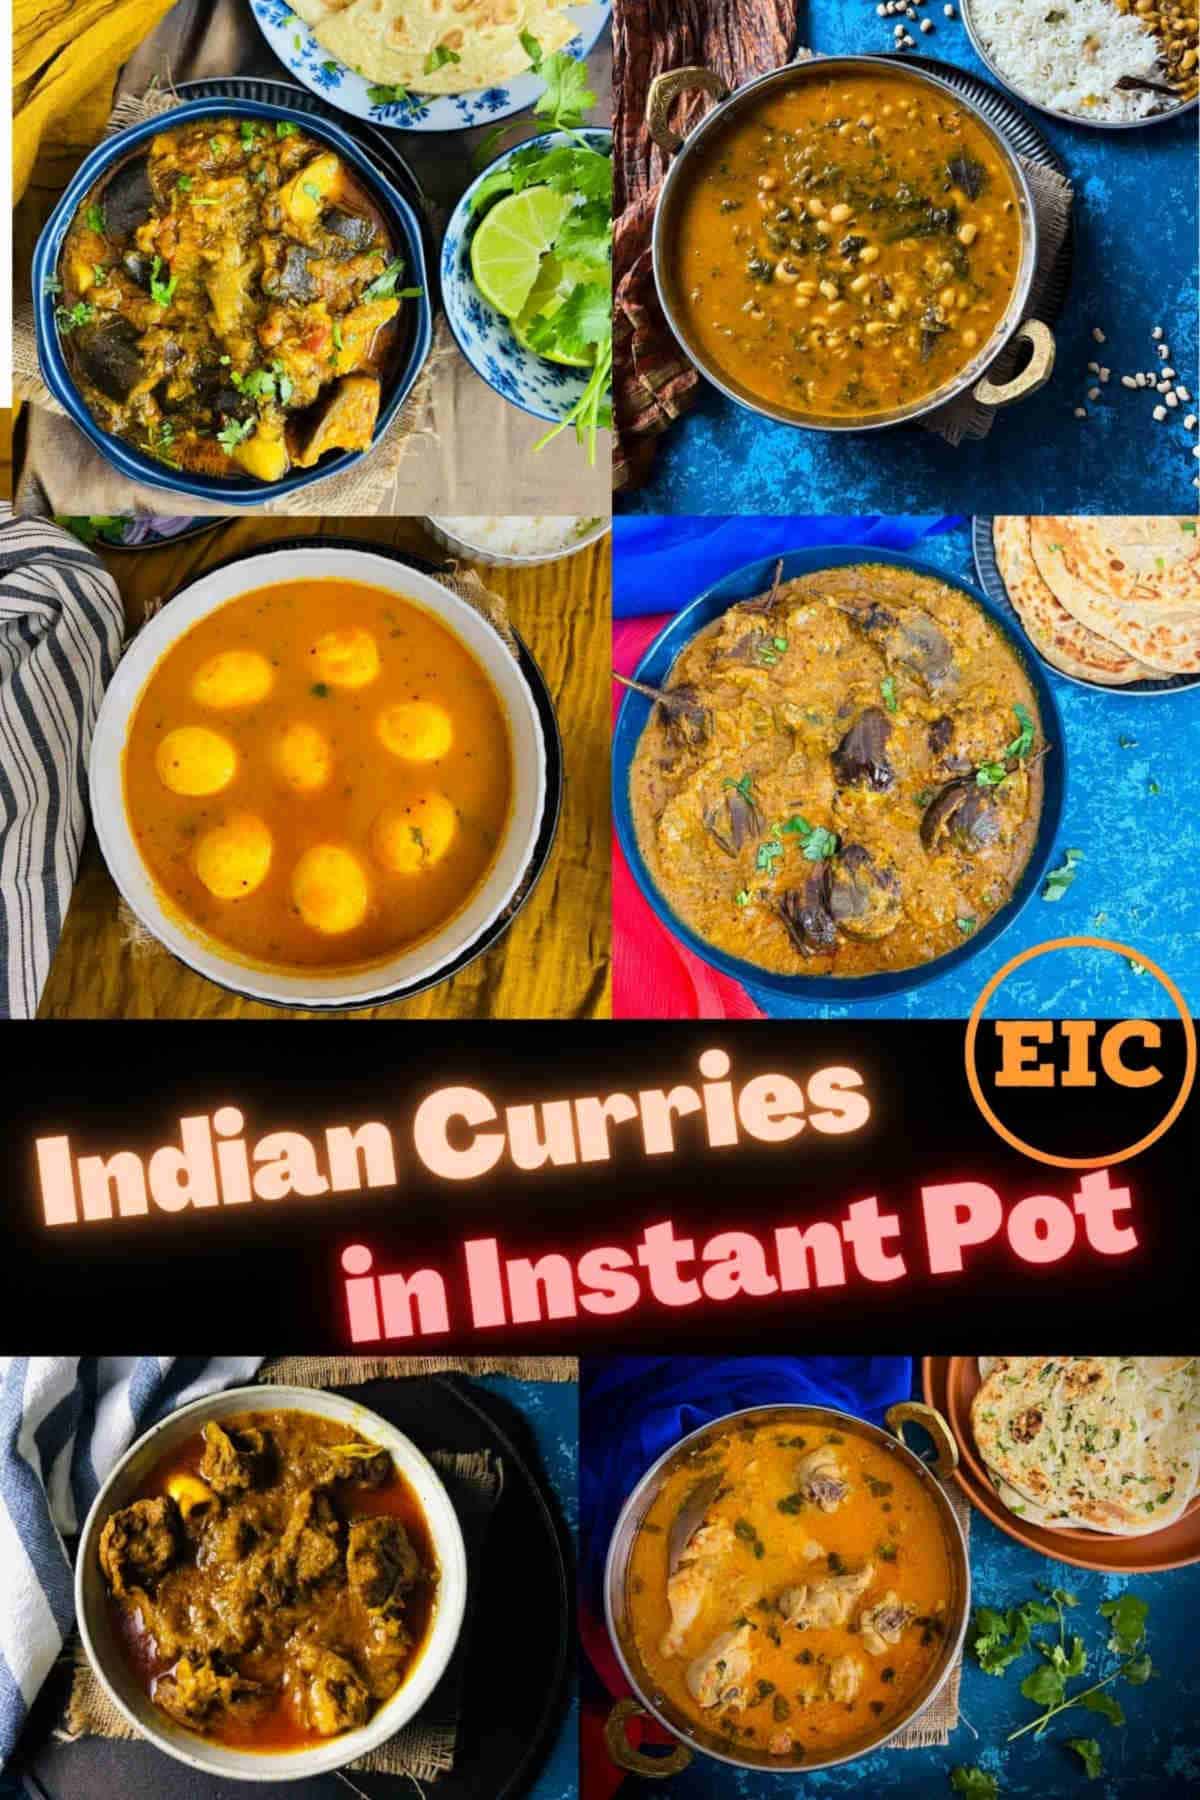 Collage of Indian curries in instant pot.